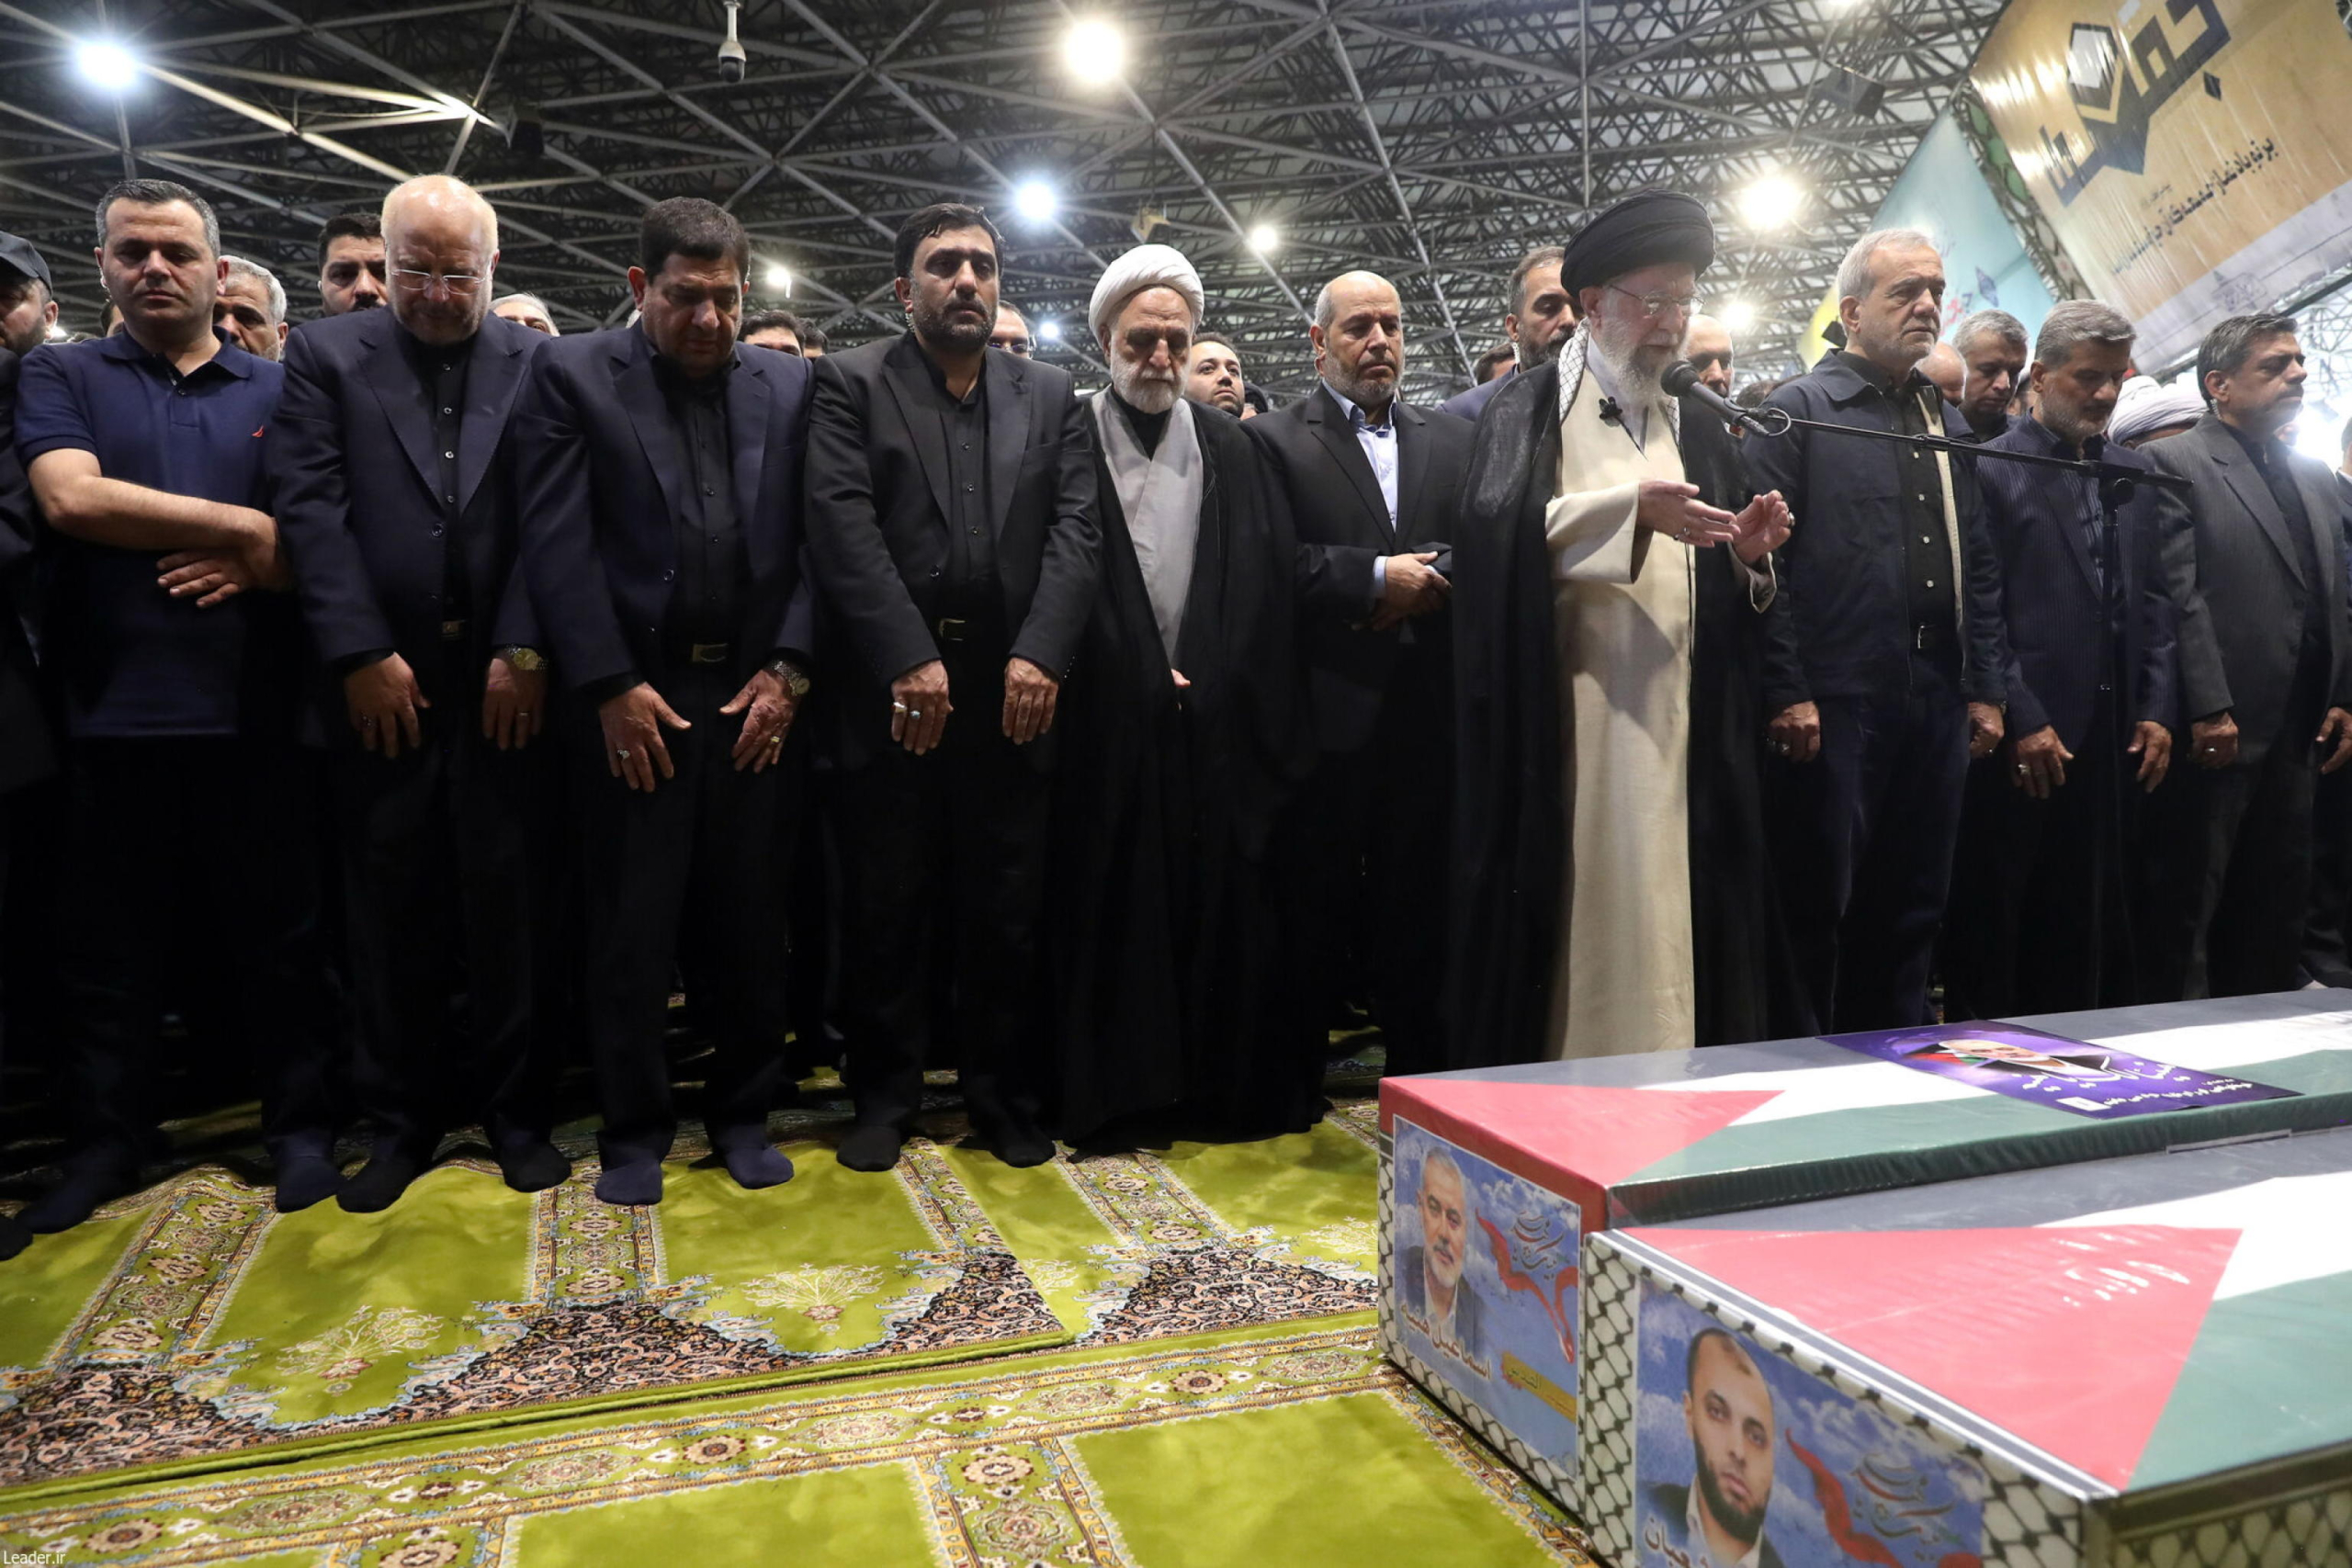 epa11514629 A handout photo made available by the Iranian Supreme Leader's Office shows Supreme Leader Ayatollah Ali Khamenei (front) leading a prayer before the coffins of late Hamas leader Ismail Haniyeh and his bodyguard in Tehran, Iran, 01 August 2024. Haniyeh and one of his bodyguards were targeted and killed in Tehran on 31 July 2024, the Iranian Revolutionary Guard Corps (IRGC) confirmed.  EPA/IRANIAN SUPREME LEADER OFFICE HANDOUT HANDOUT EDITORIAL USE ONLY/NO SALES